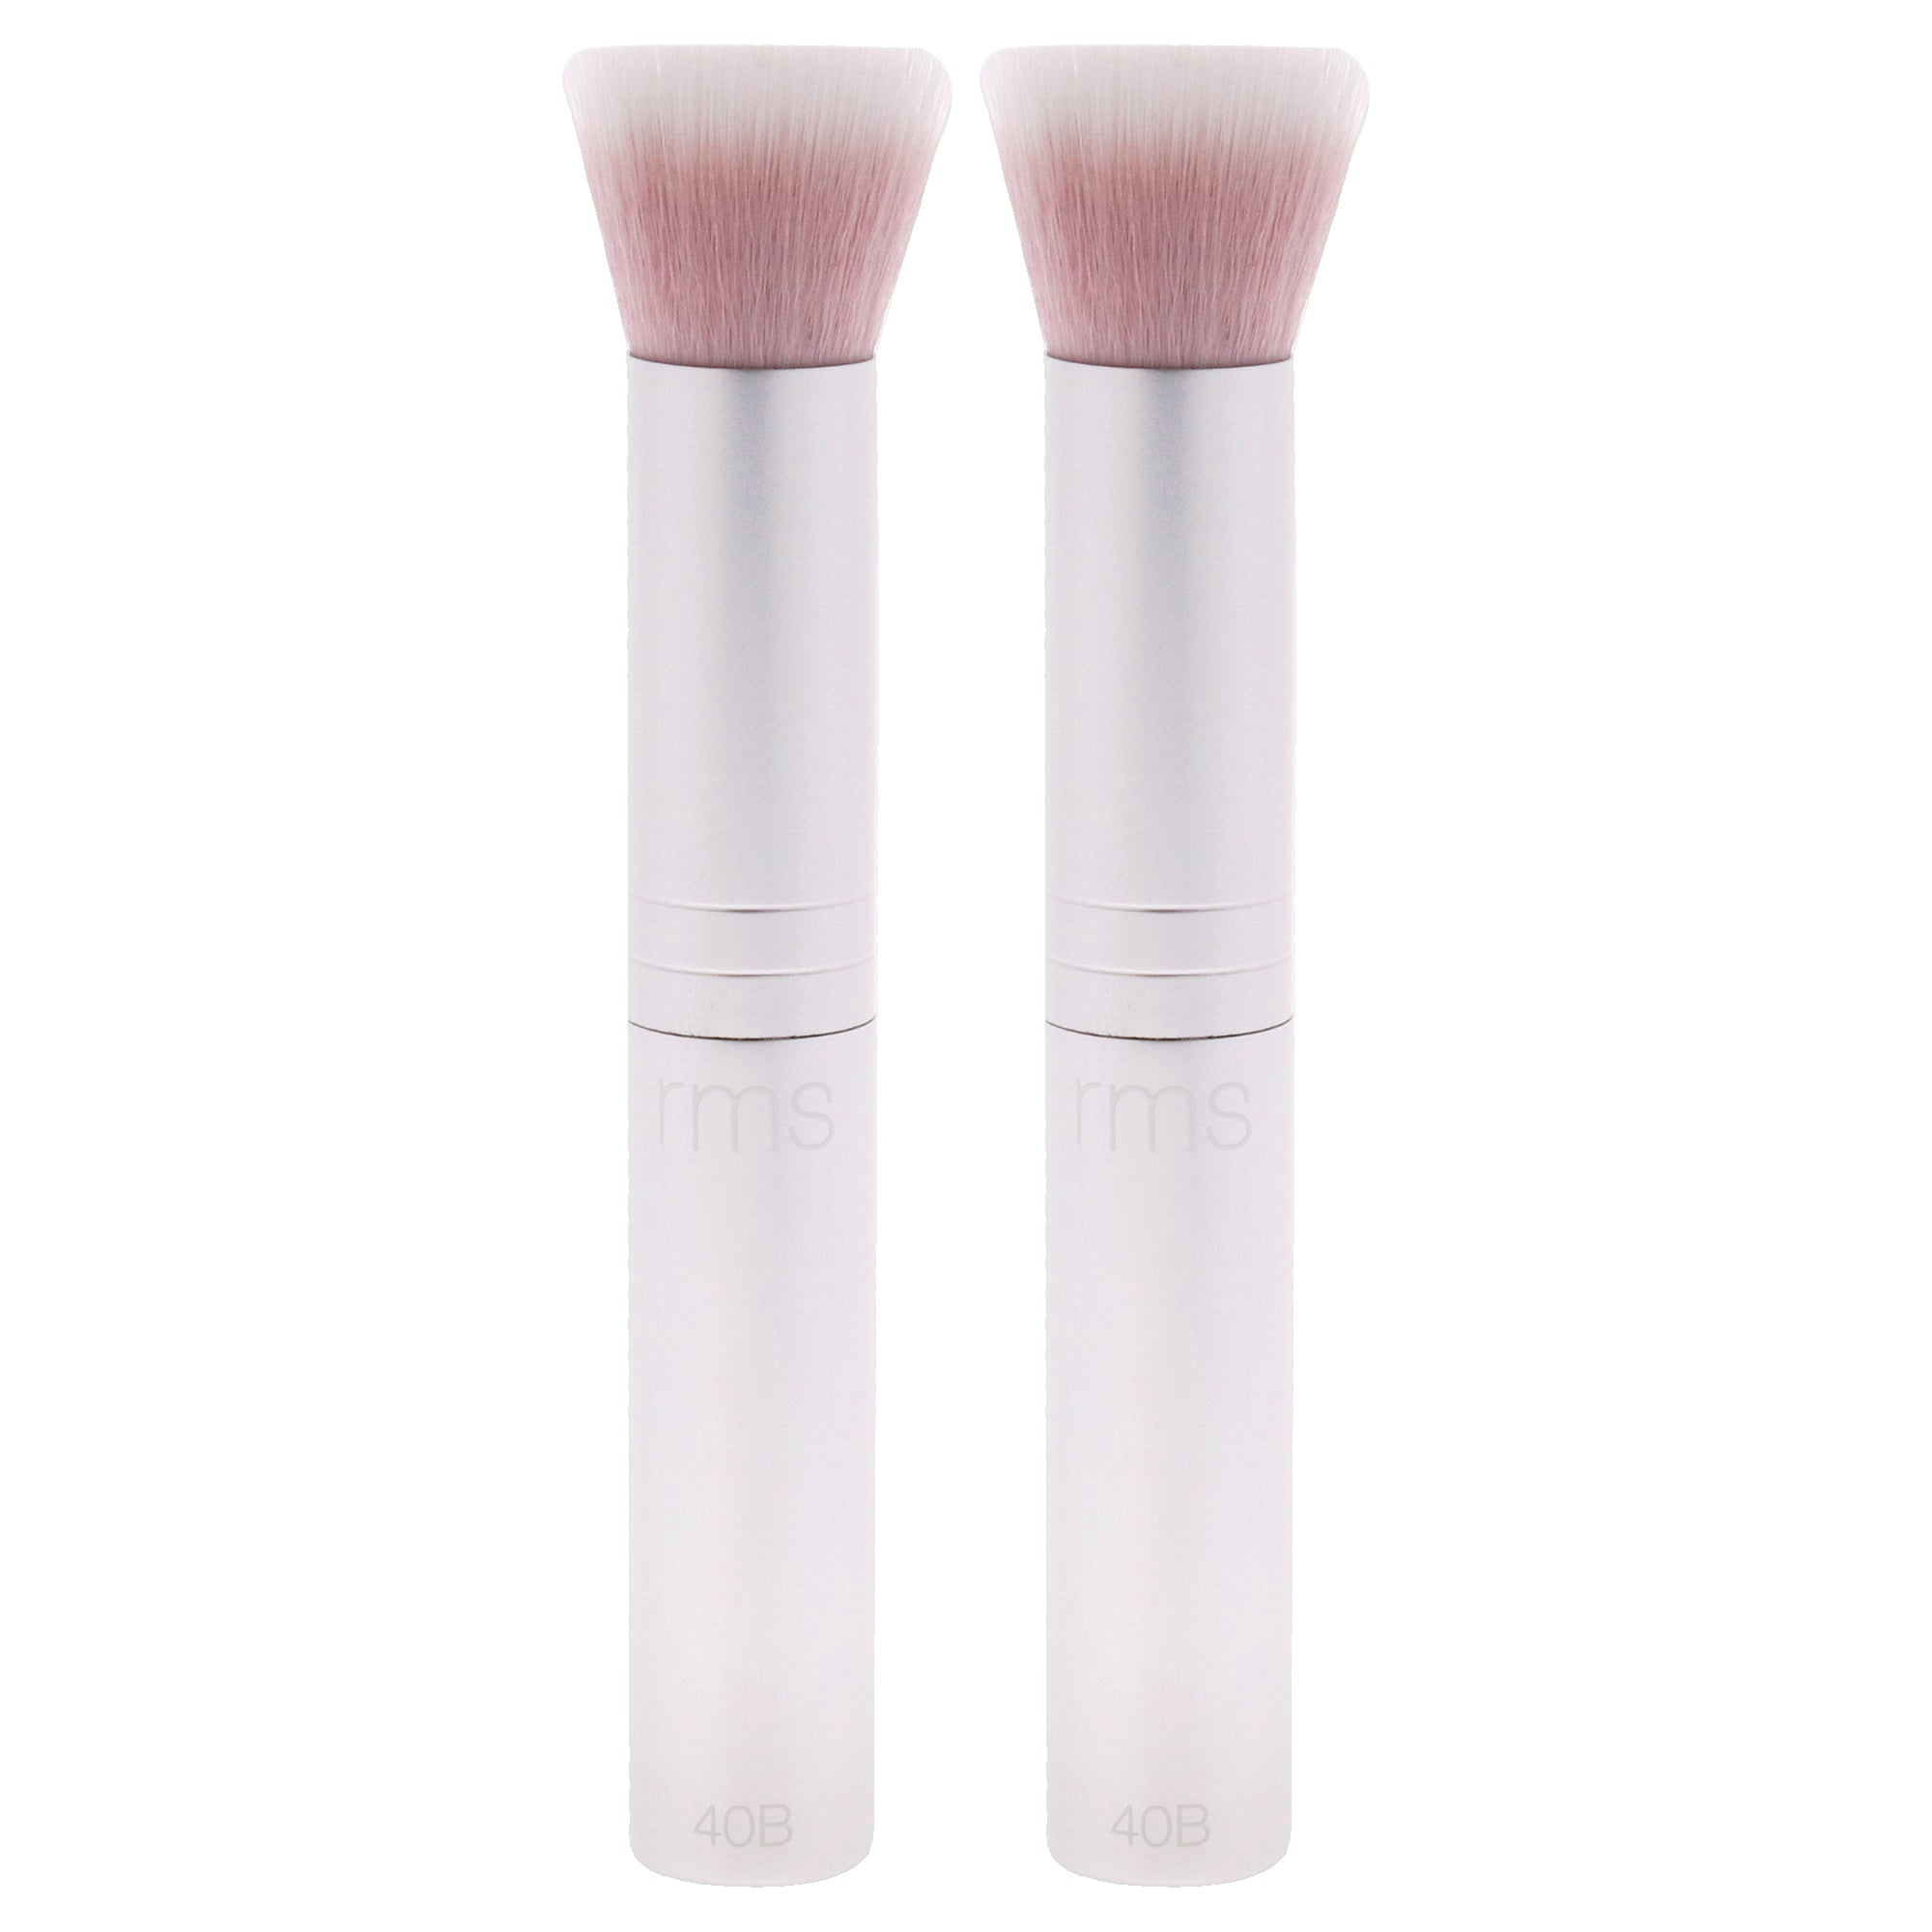 Skin2Skin Blush by RMS Beauty for Women - 1 Pc Brush - Pack of 2